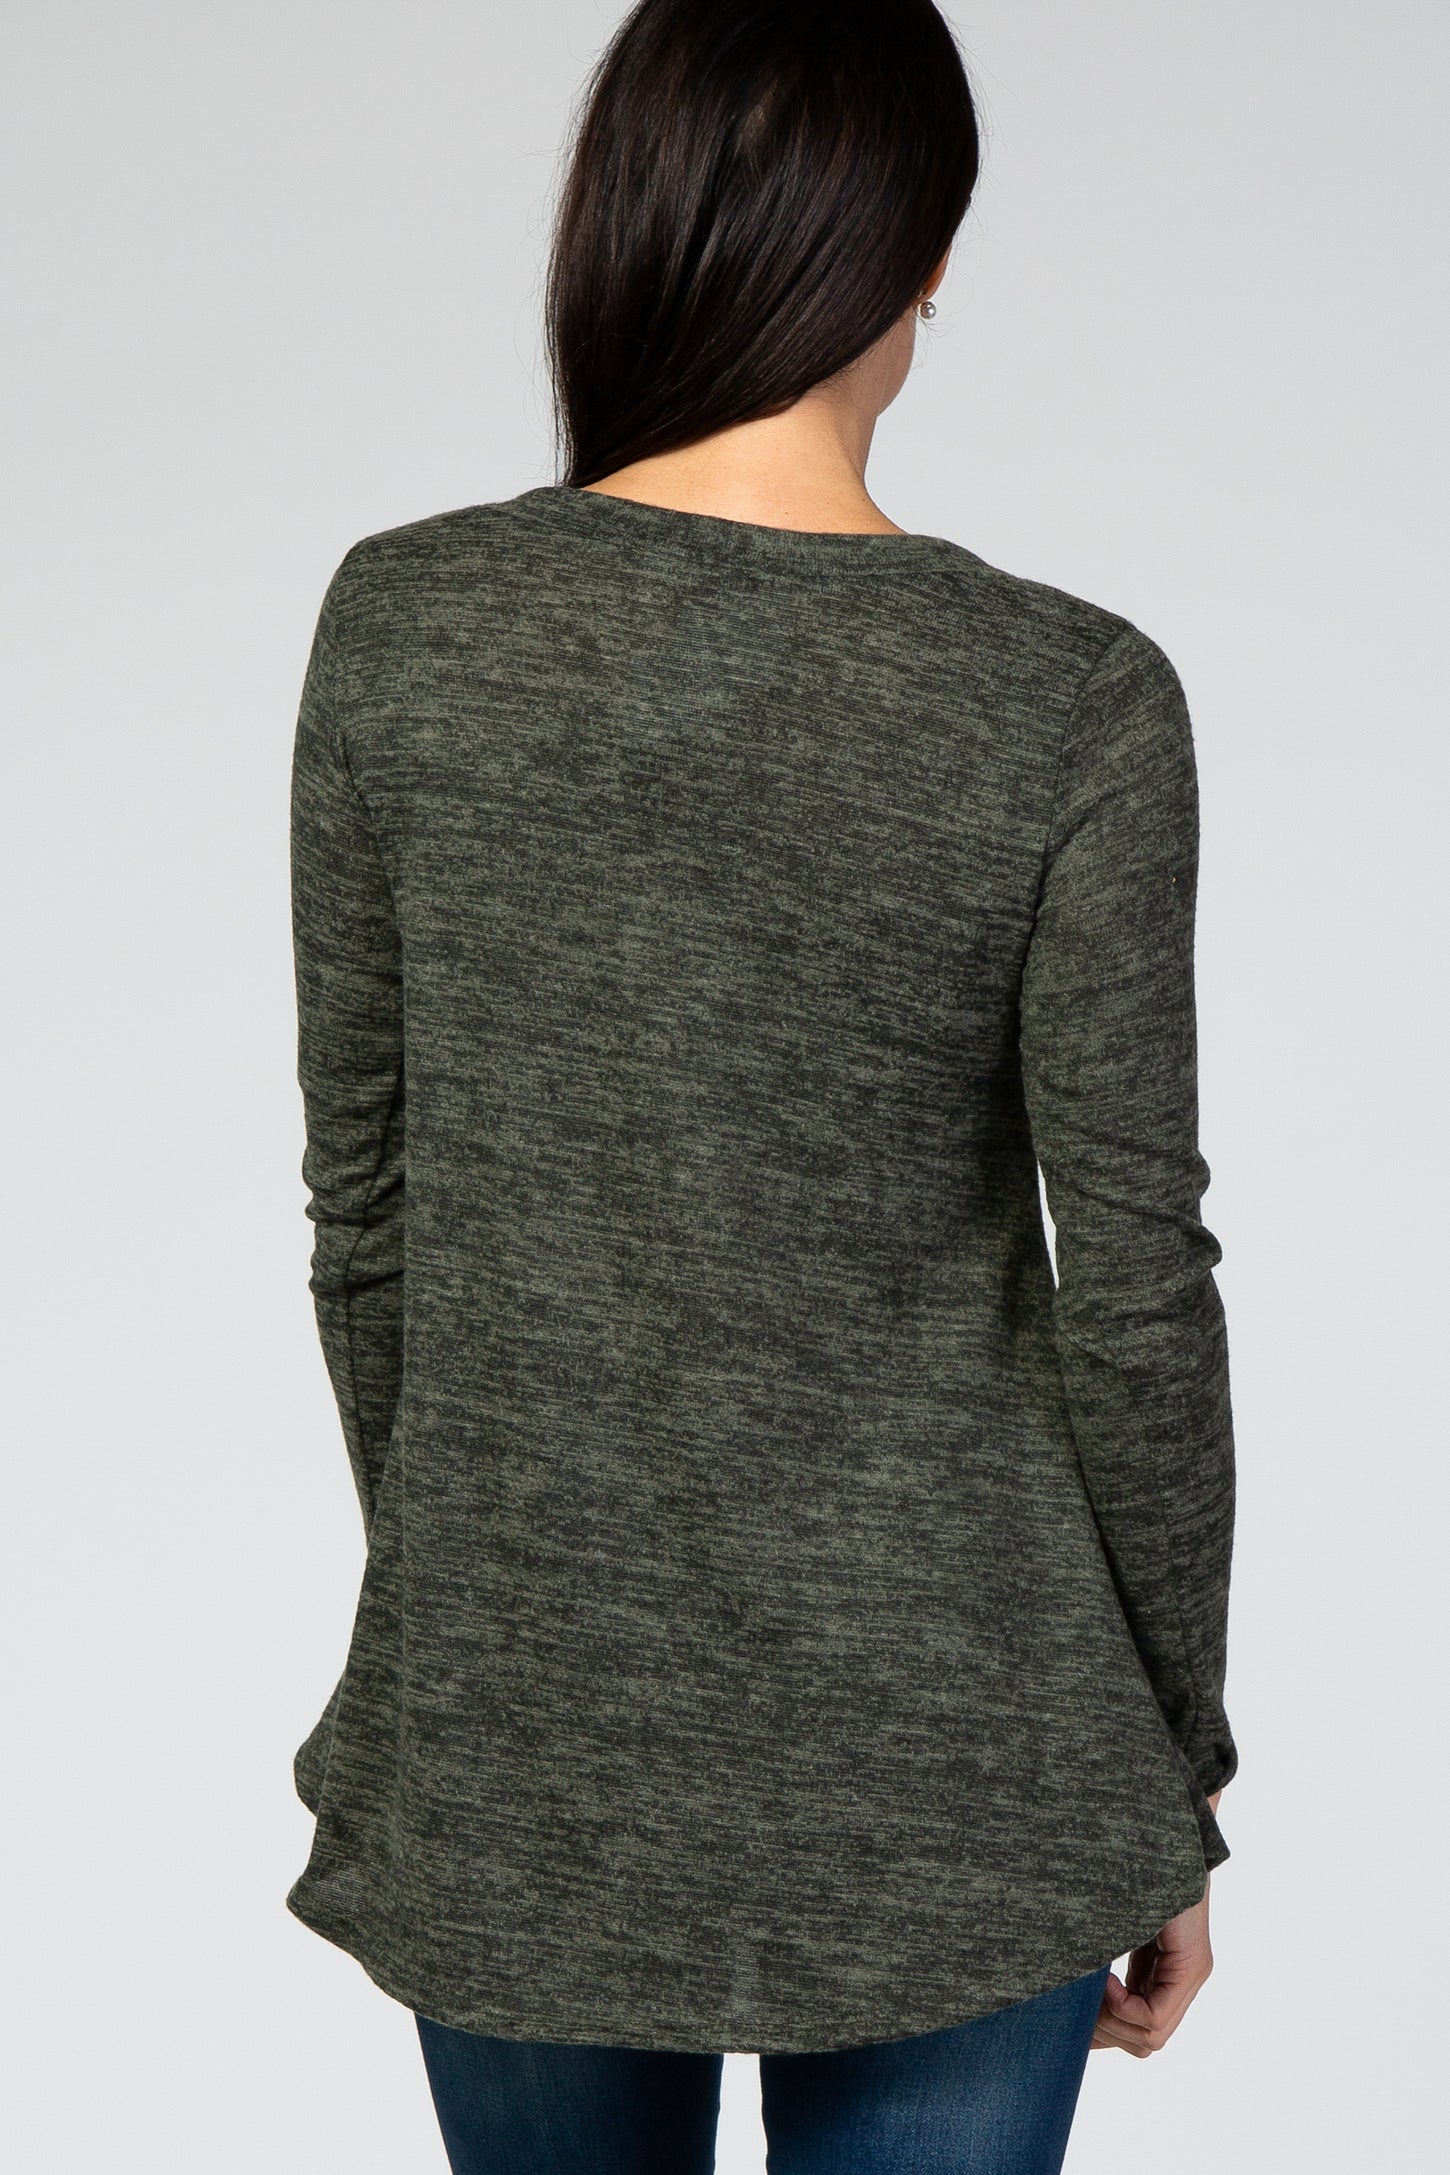 Olive Heathered Button Front Top